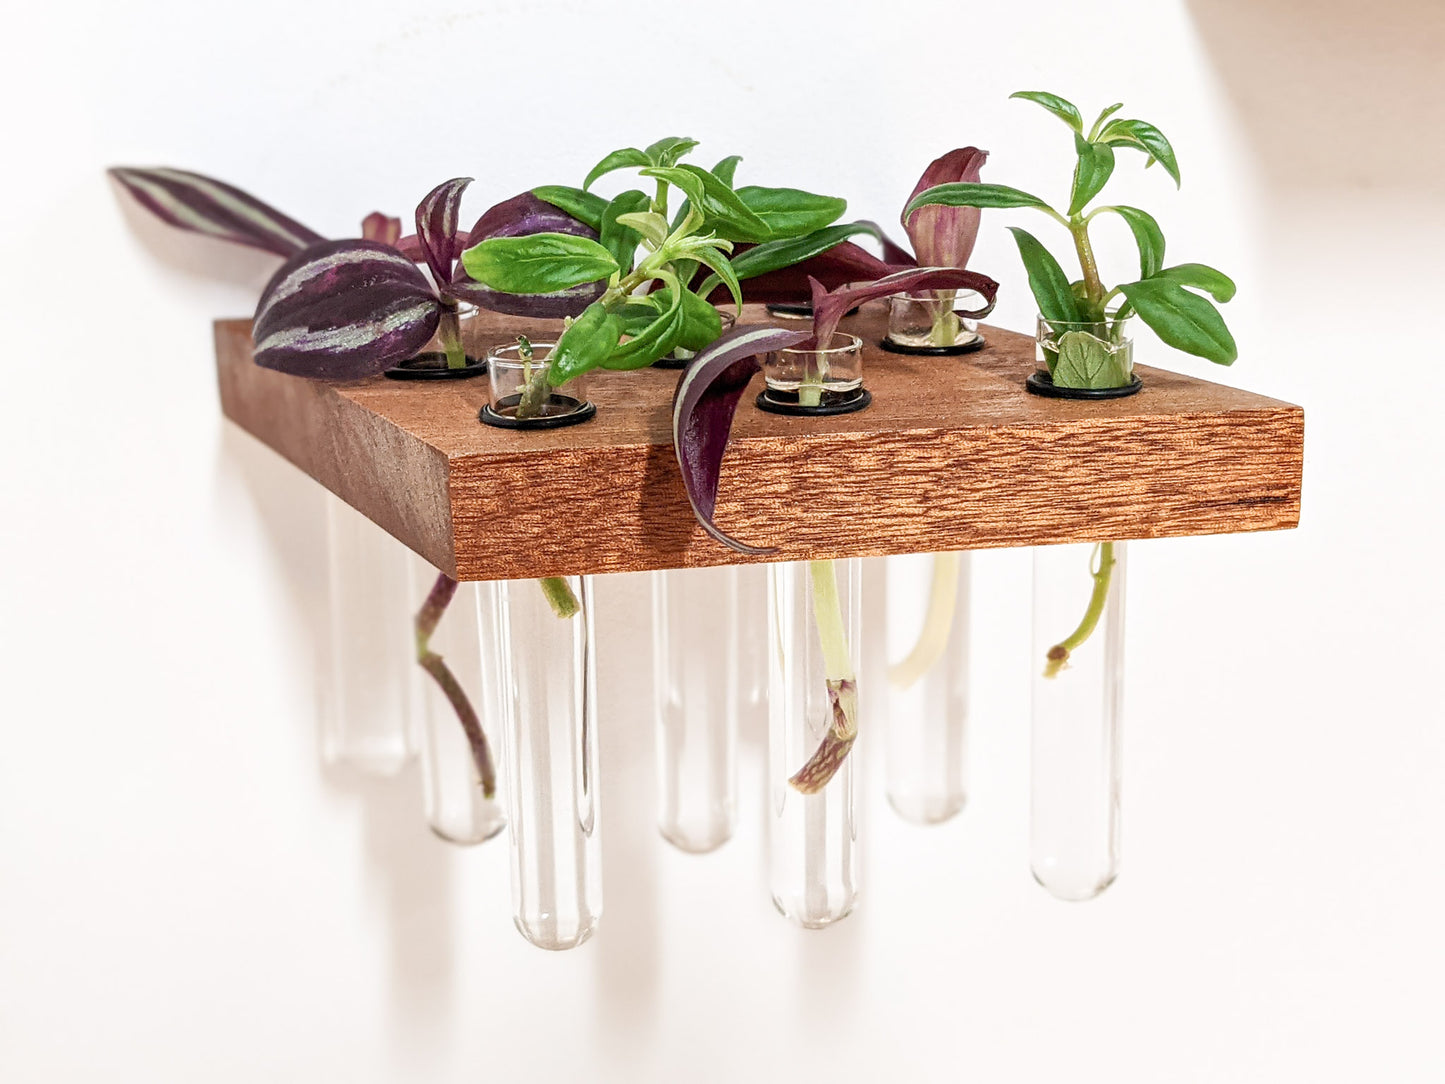 A head-on view of the mahogany rhombus propagation shelf. The mahogany is smooth and dark brown with crisp sides. 4 glass test tubes are filled with green and purple cuttings. 